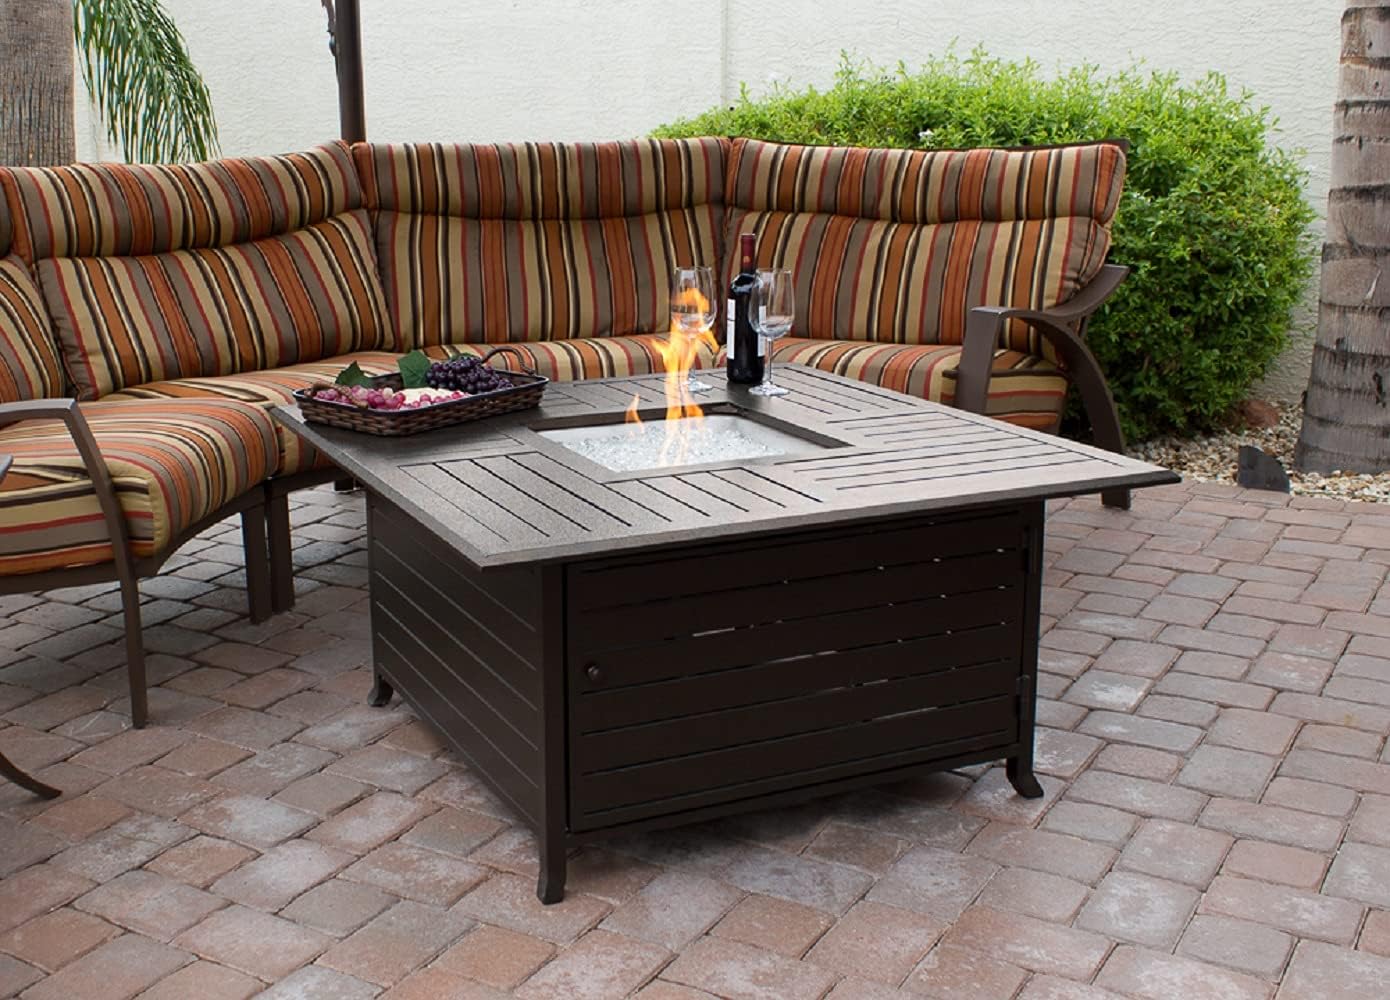 AZ Patio Heaters Outdoor Aluminum Fire Pit in Hammered Bronze